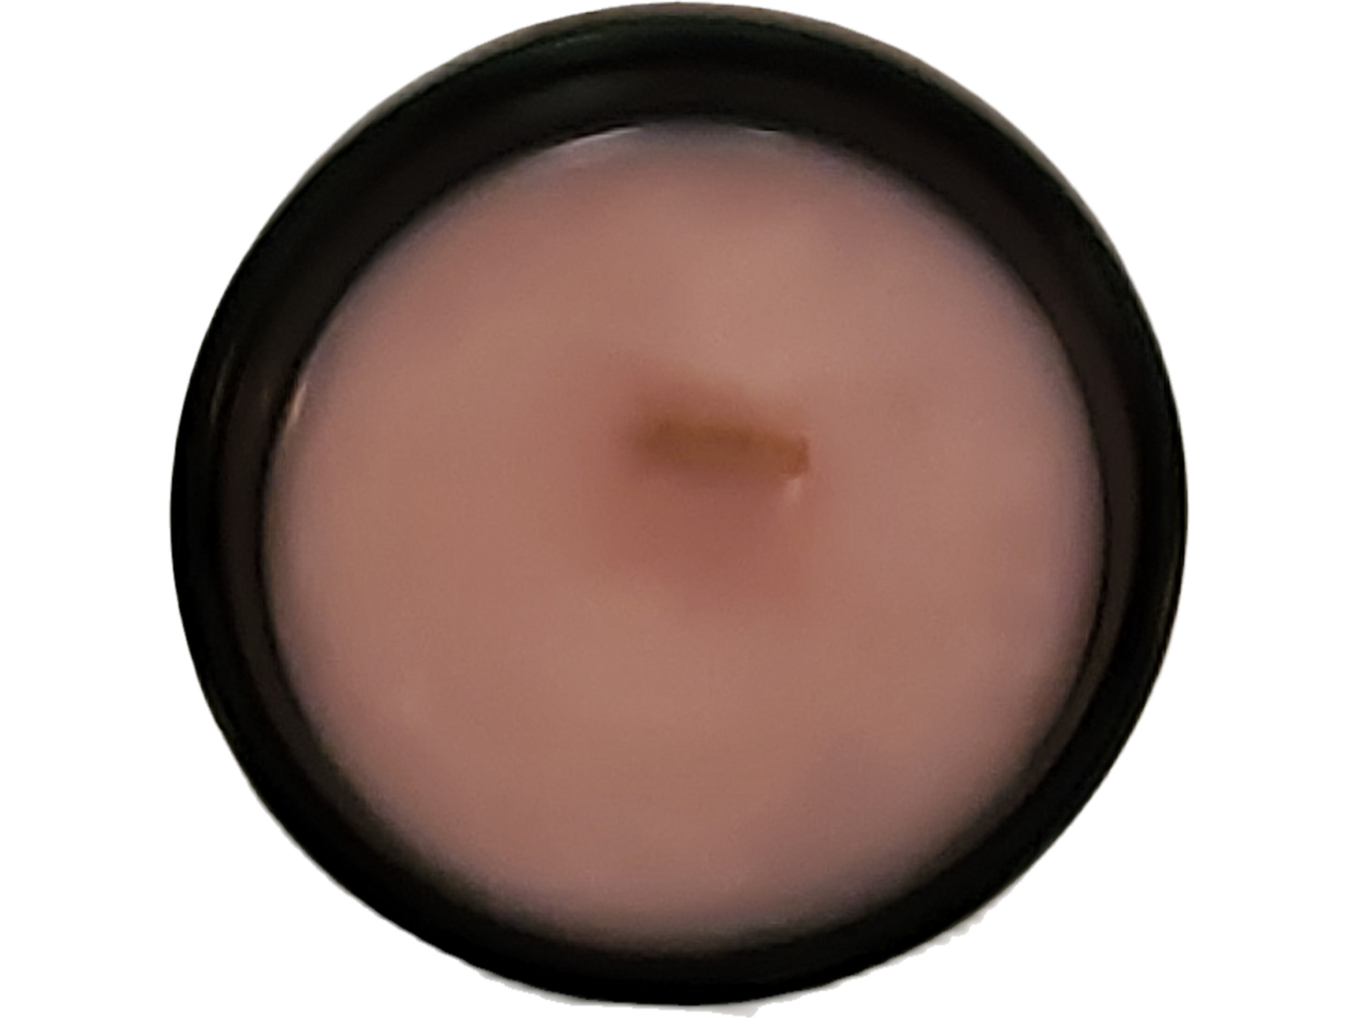 Strawberry Guava Vegan Aromatherapy Candle pampered soaps